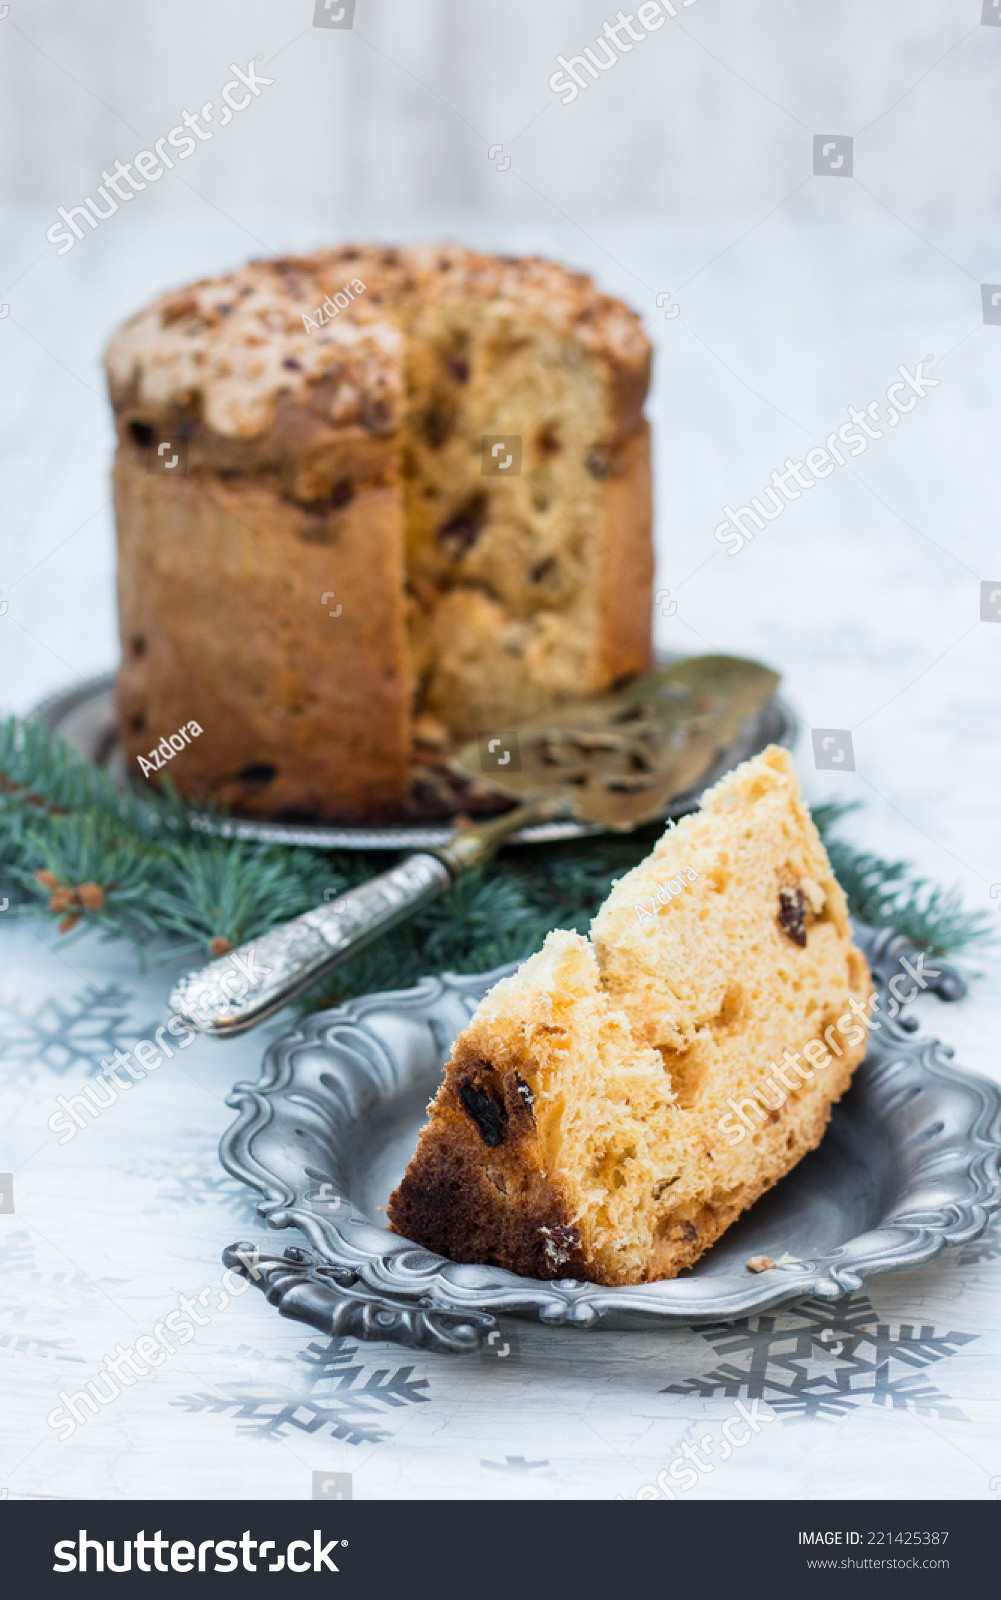 Italian Sweet Bread Loaf Made For Christmas
 Panettone Italian Christmas Sweet Bread Loaf Stock